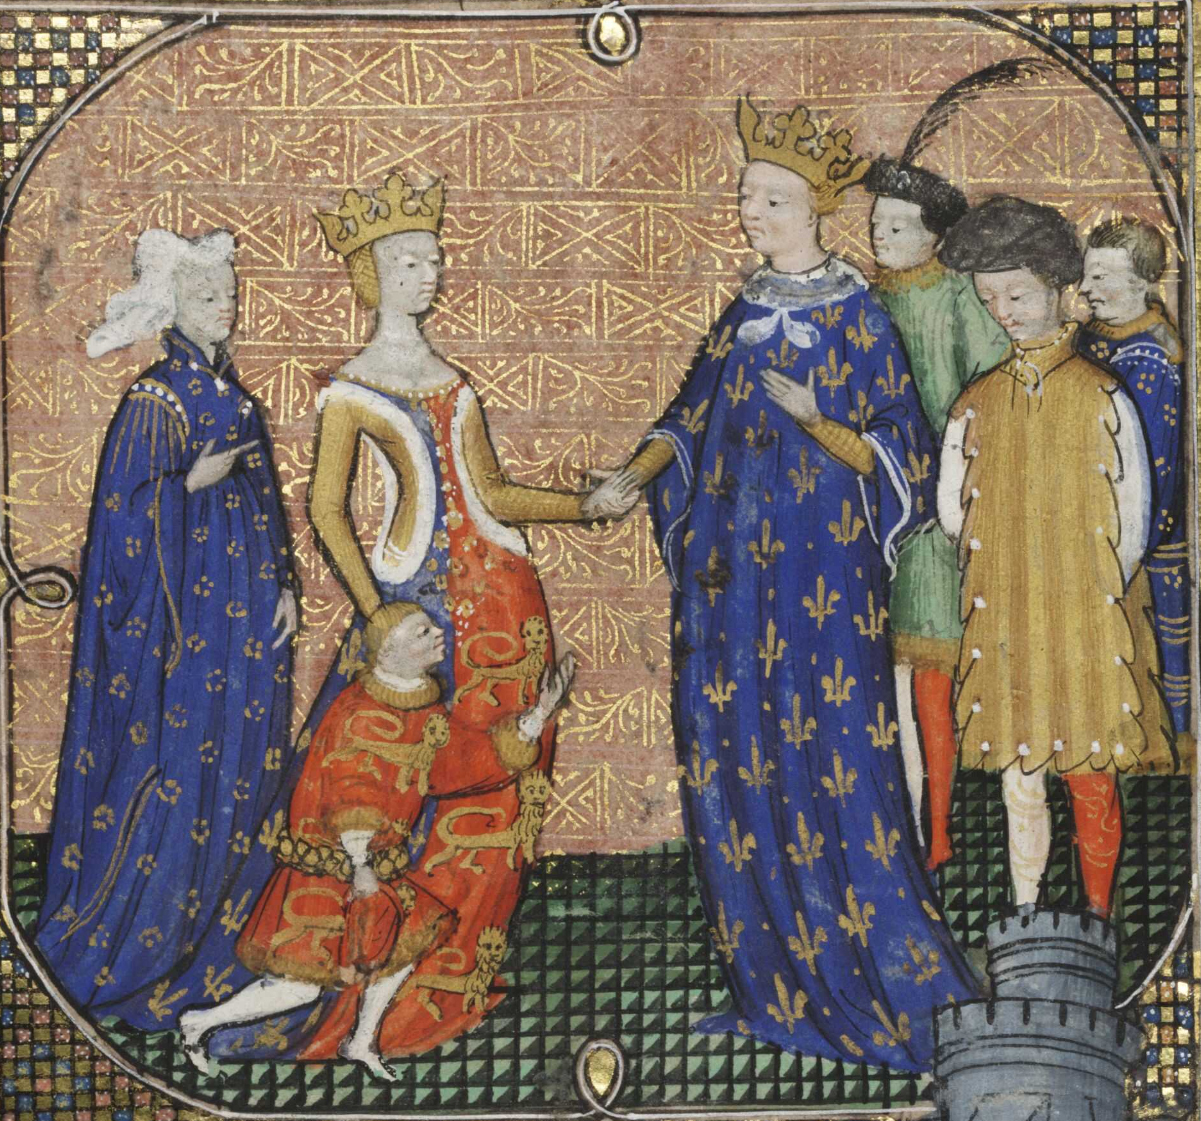 A near-contemporary miniature showing the future Edward III giving homage to Charles IV under the guidance of Edward's mother, and Charles's sister, Isabella, in 1325.[20]